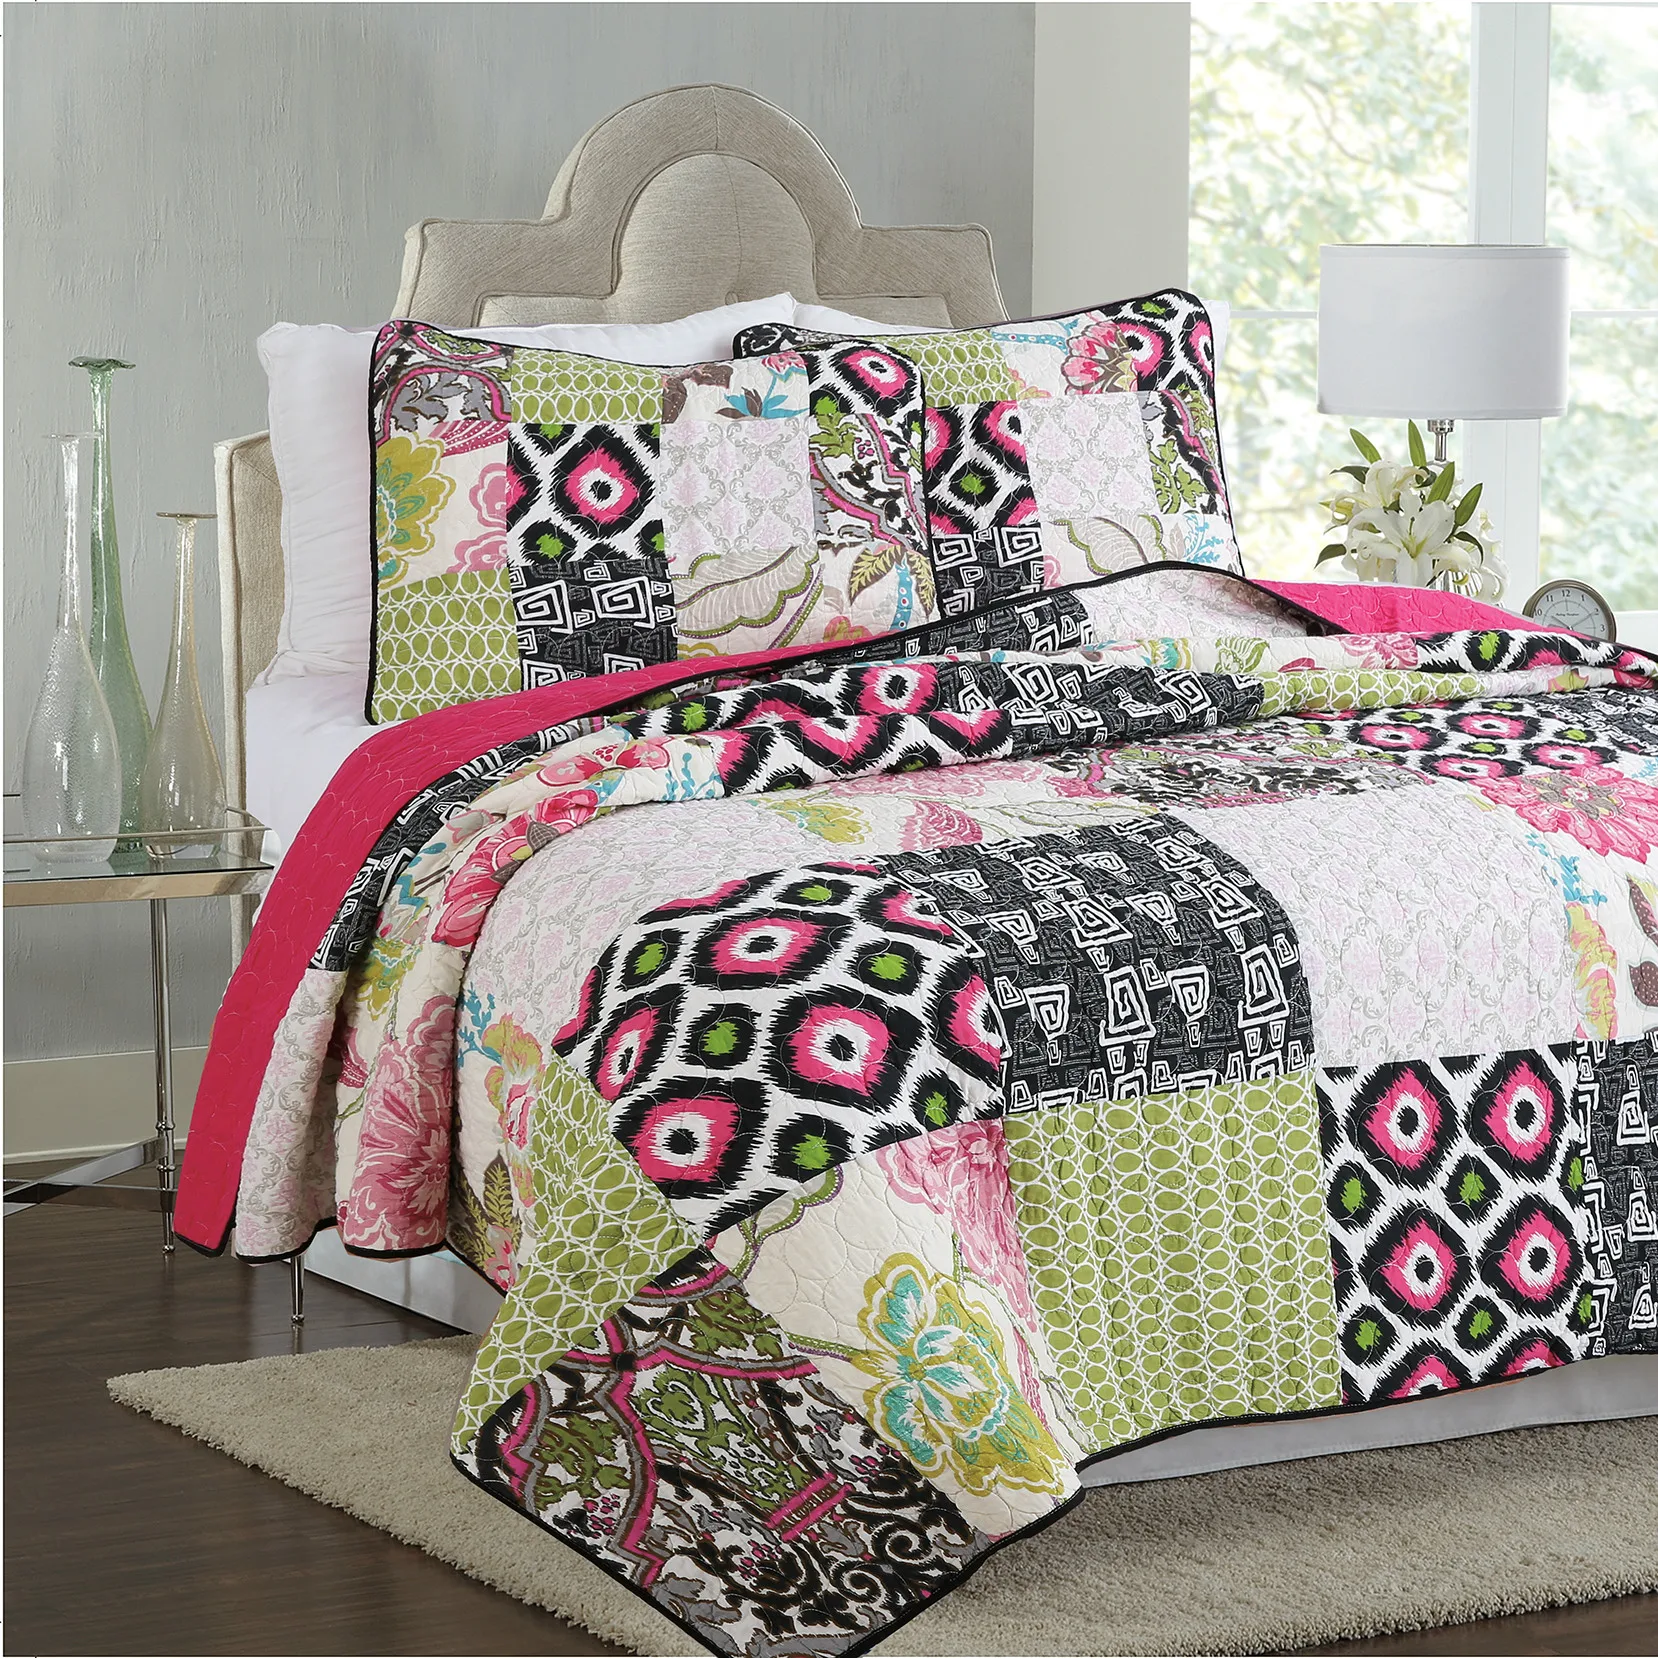 

Famvotar Chic Bohemian Cotton Patchwork Quilted Coverlet Bedspread Set Vibrant Floral Print Queen King Size Summer Quilt